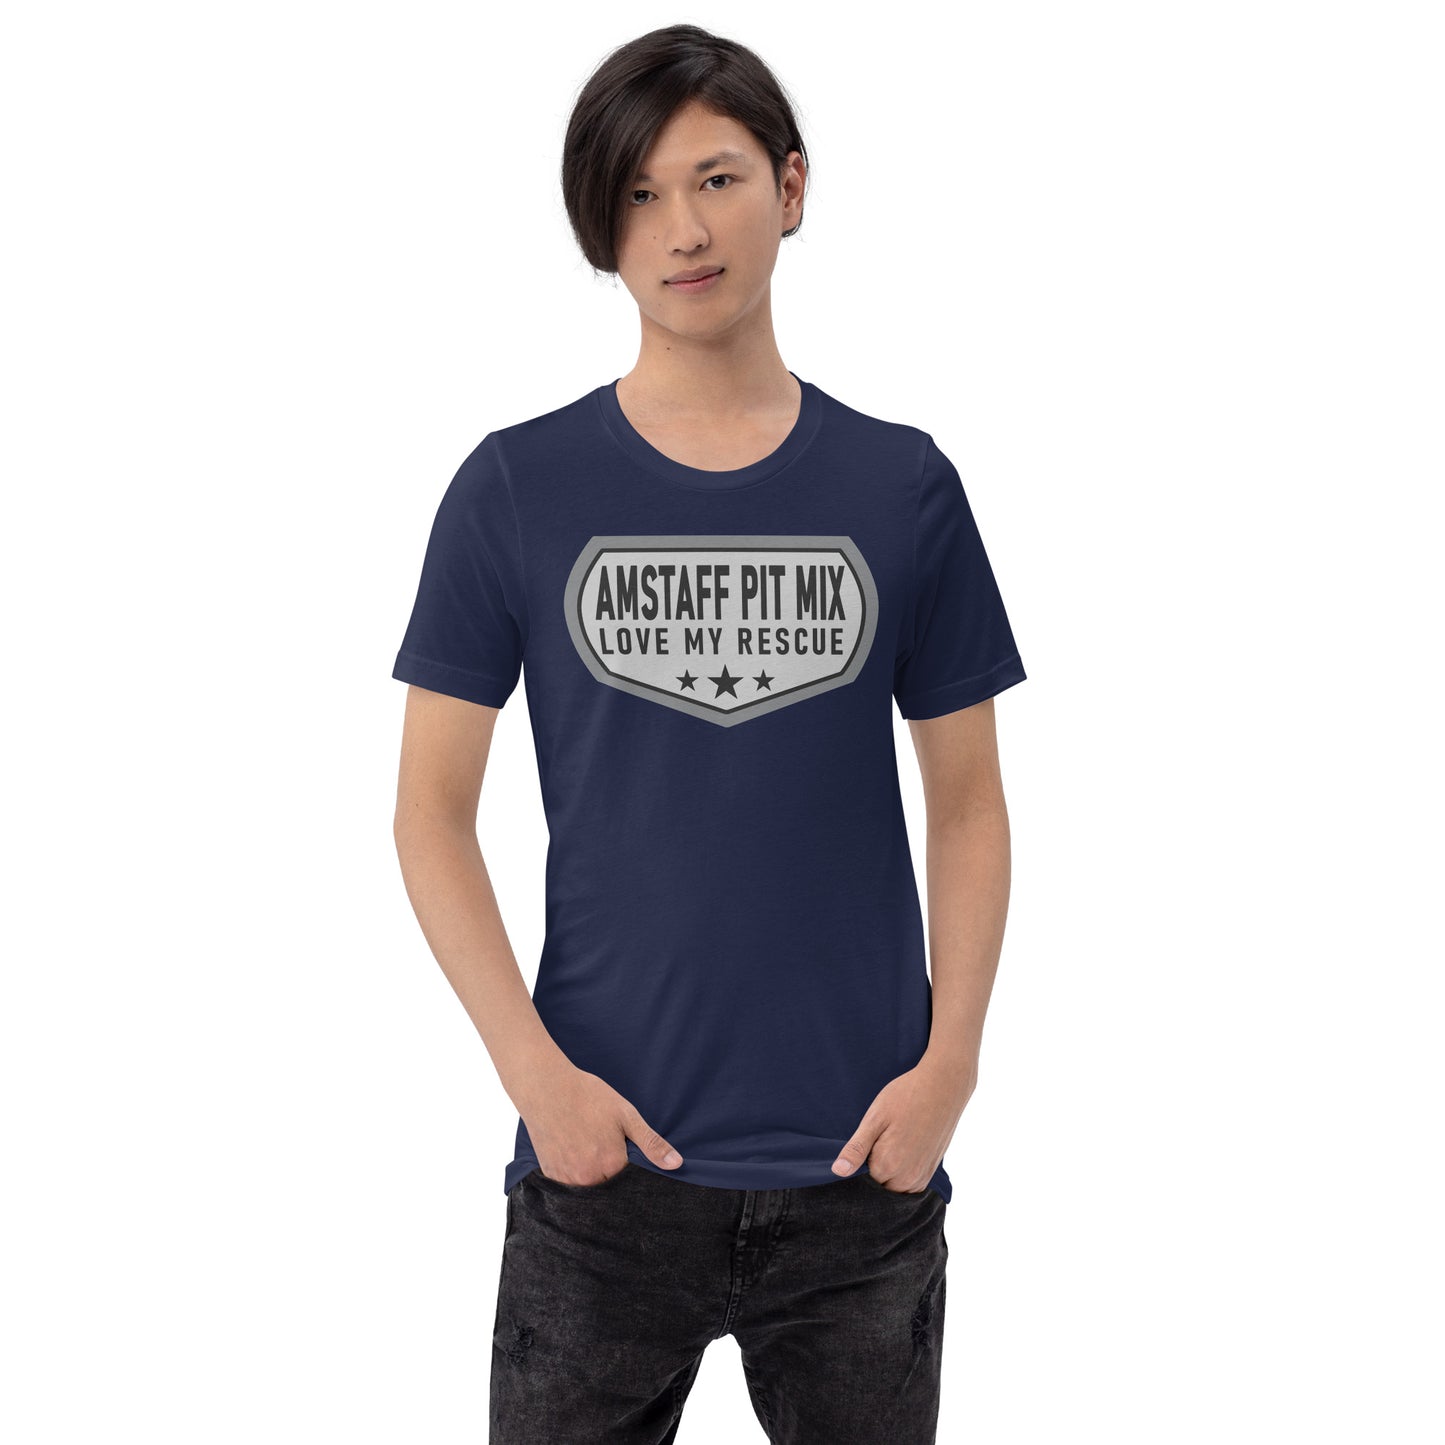 Amstaff Pit Mix Love My Rescue unisex t-shirt navy by Dog Artistry.